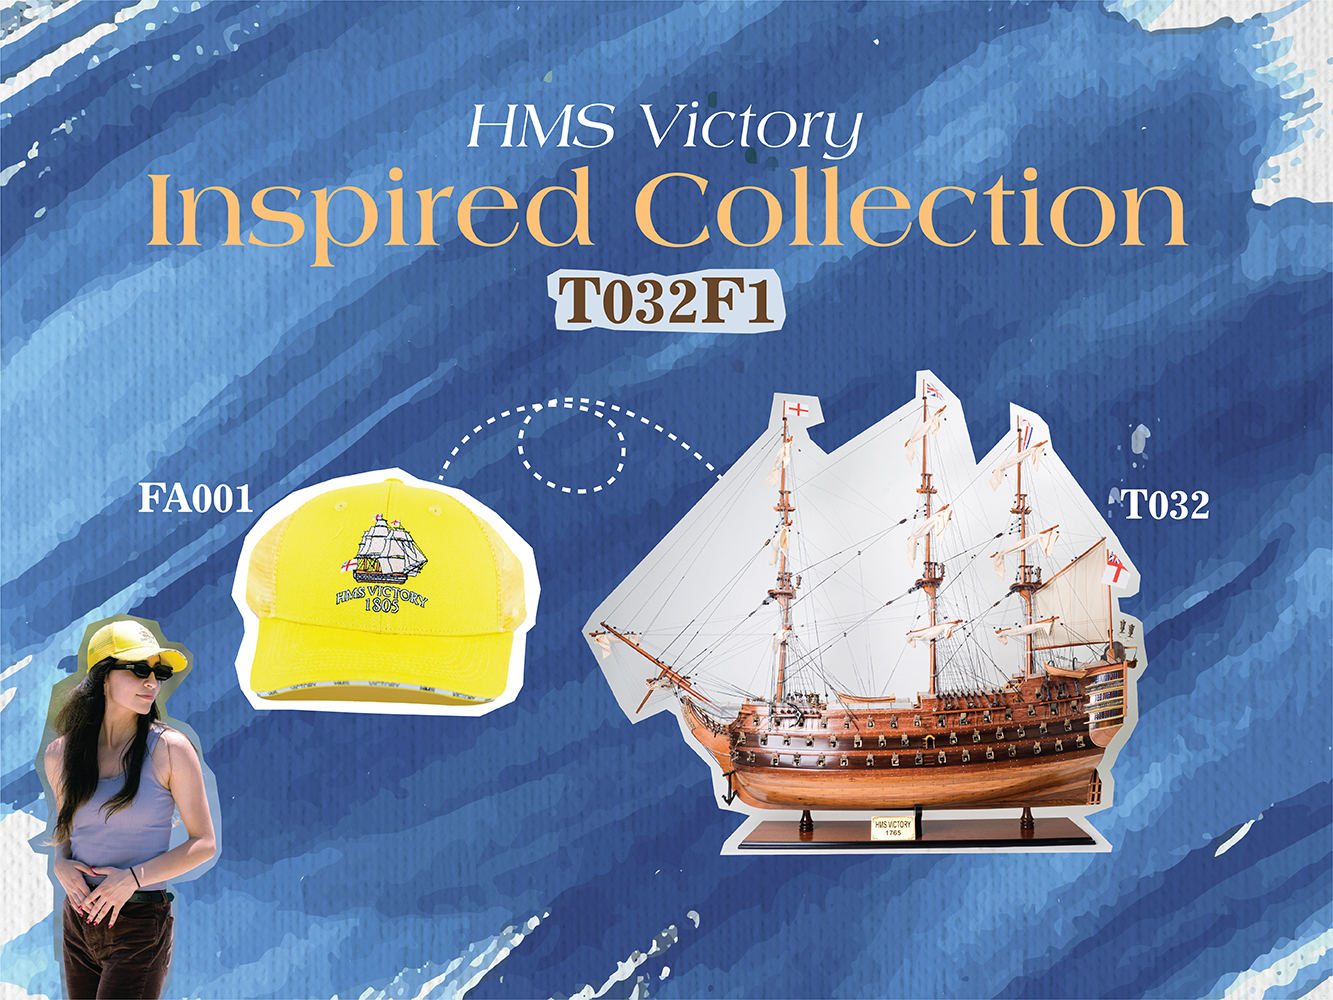 T032F1 Ultimate HMS Victory Combo: A Model Ship and Classic Hat t032f1-ultimate-hms-victory-combo-a-model-ship-and-classic-hat-l01.jpg